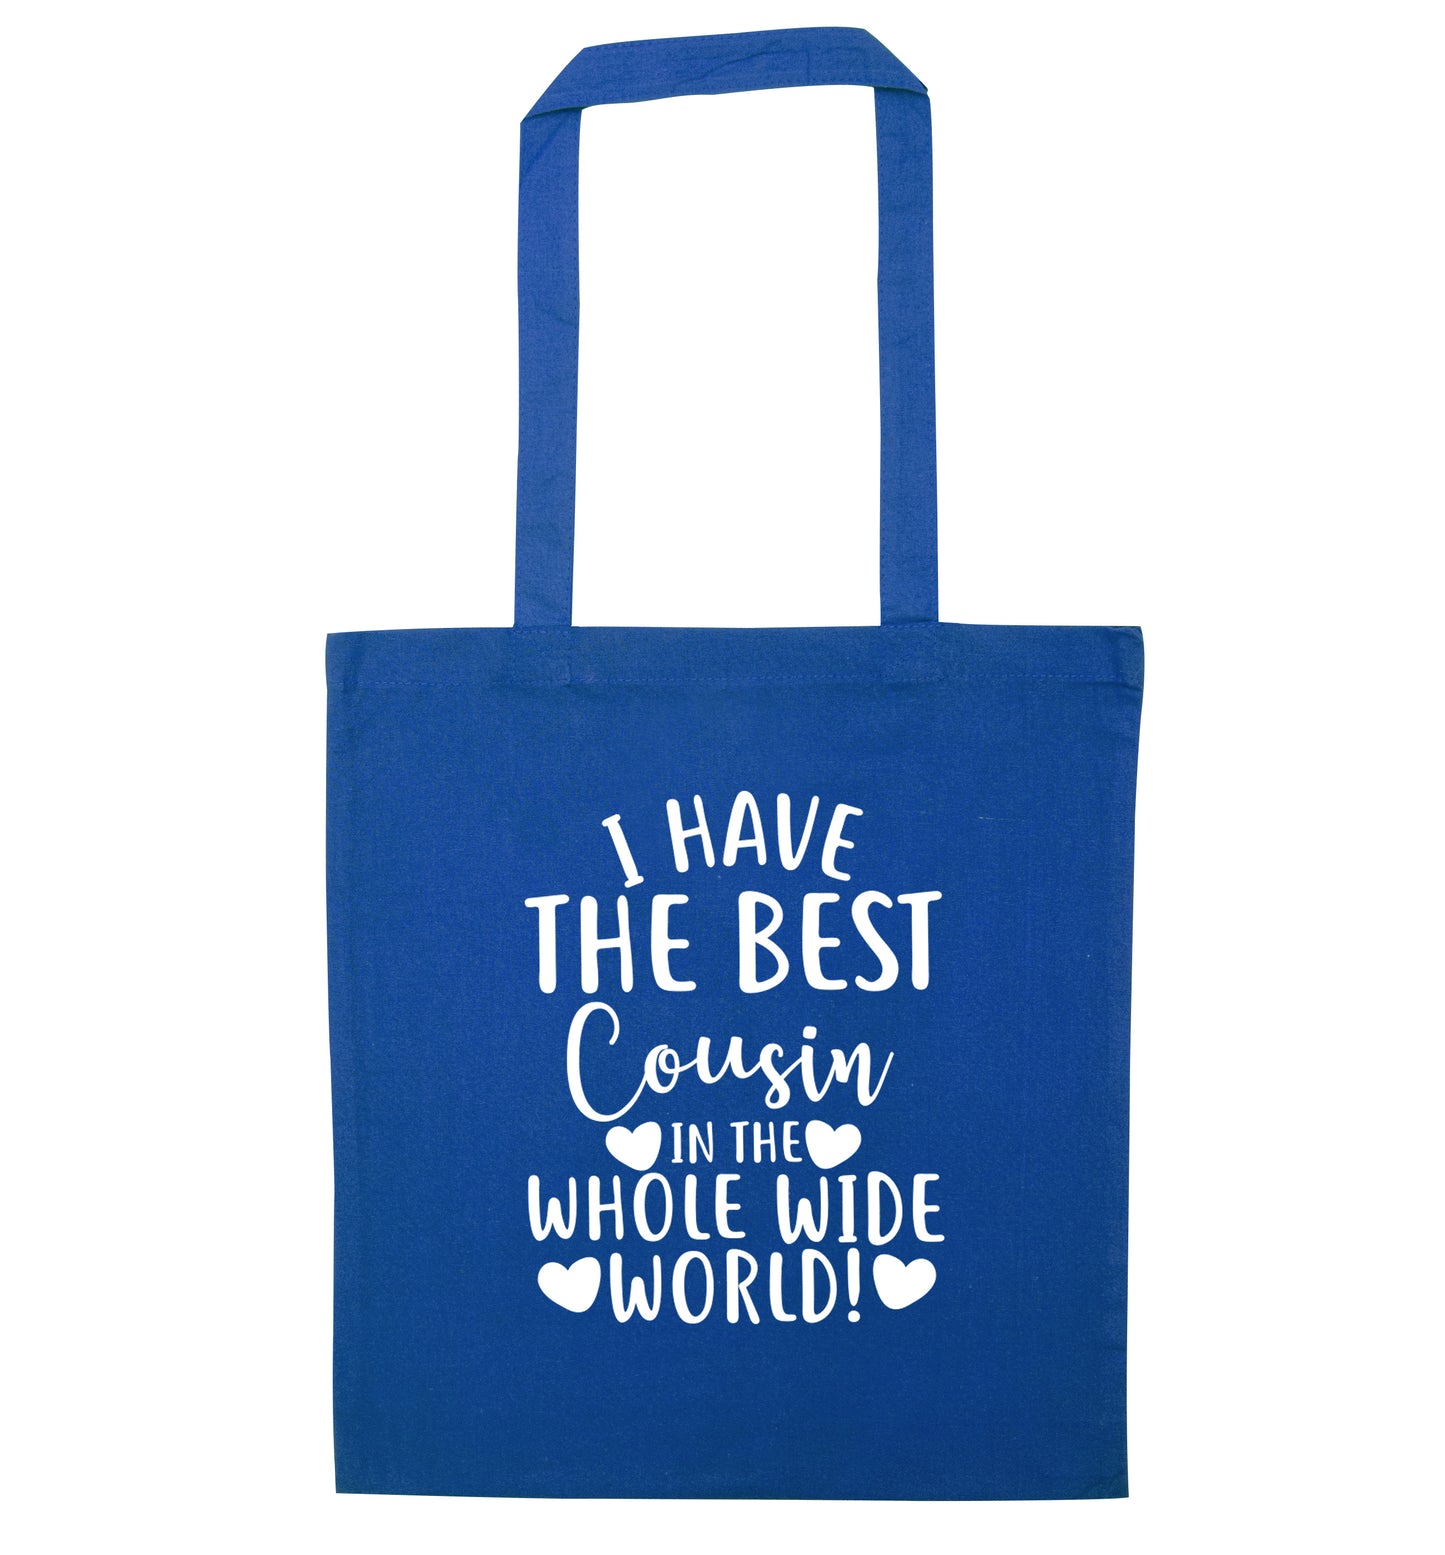 I have the best cousin in the whole wide world! blue tote bag